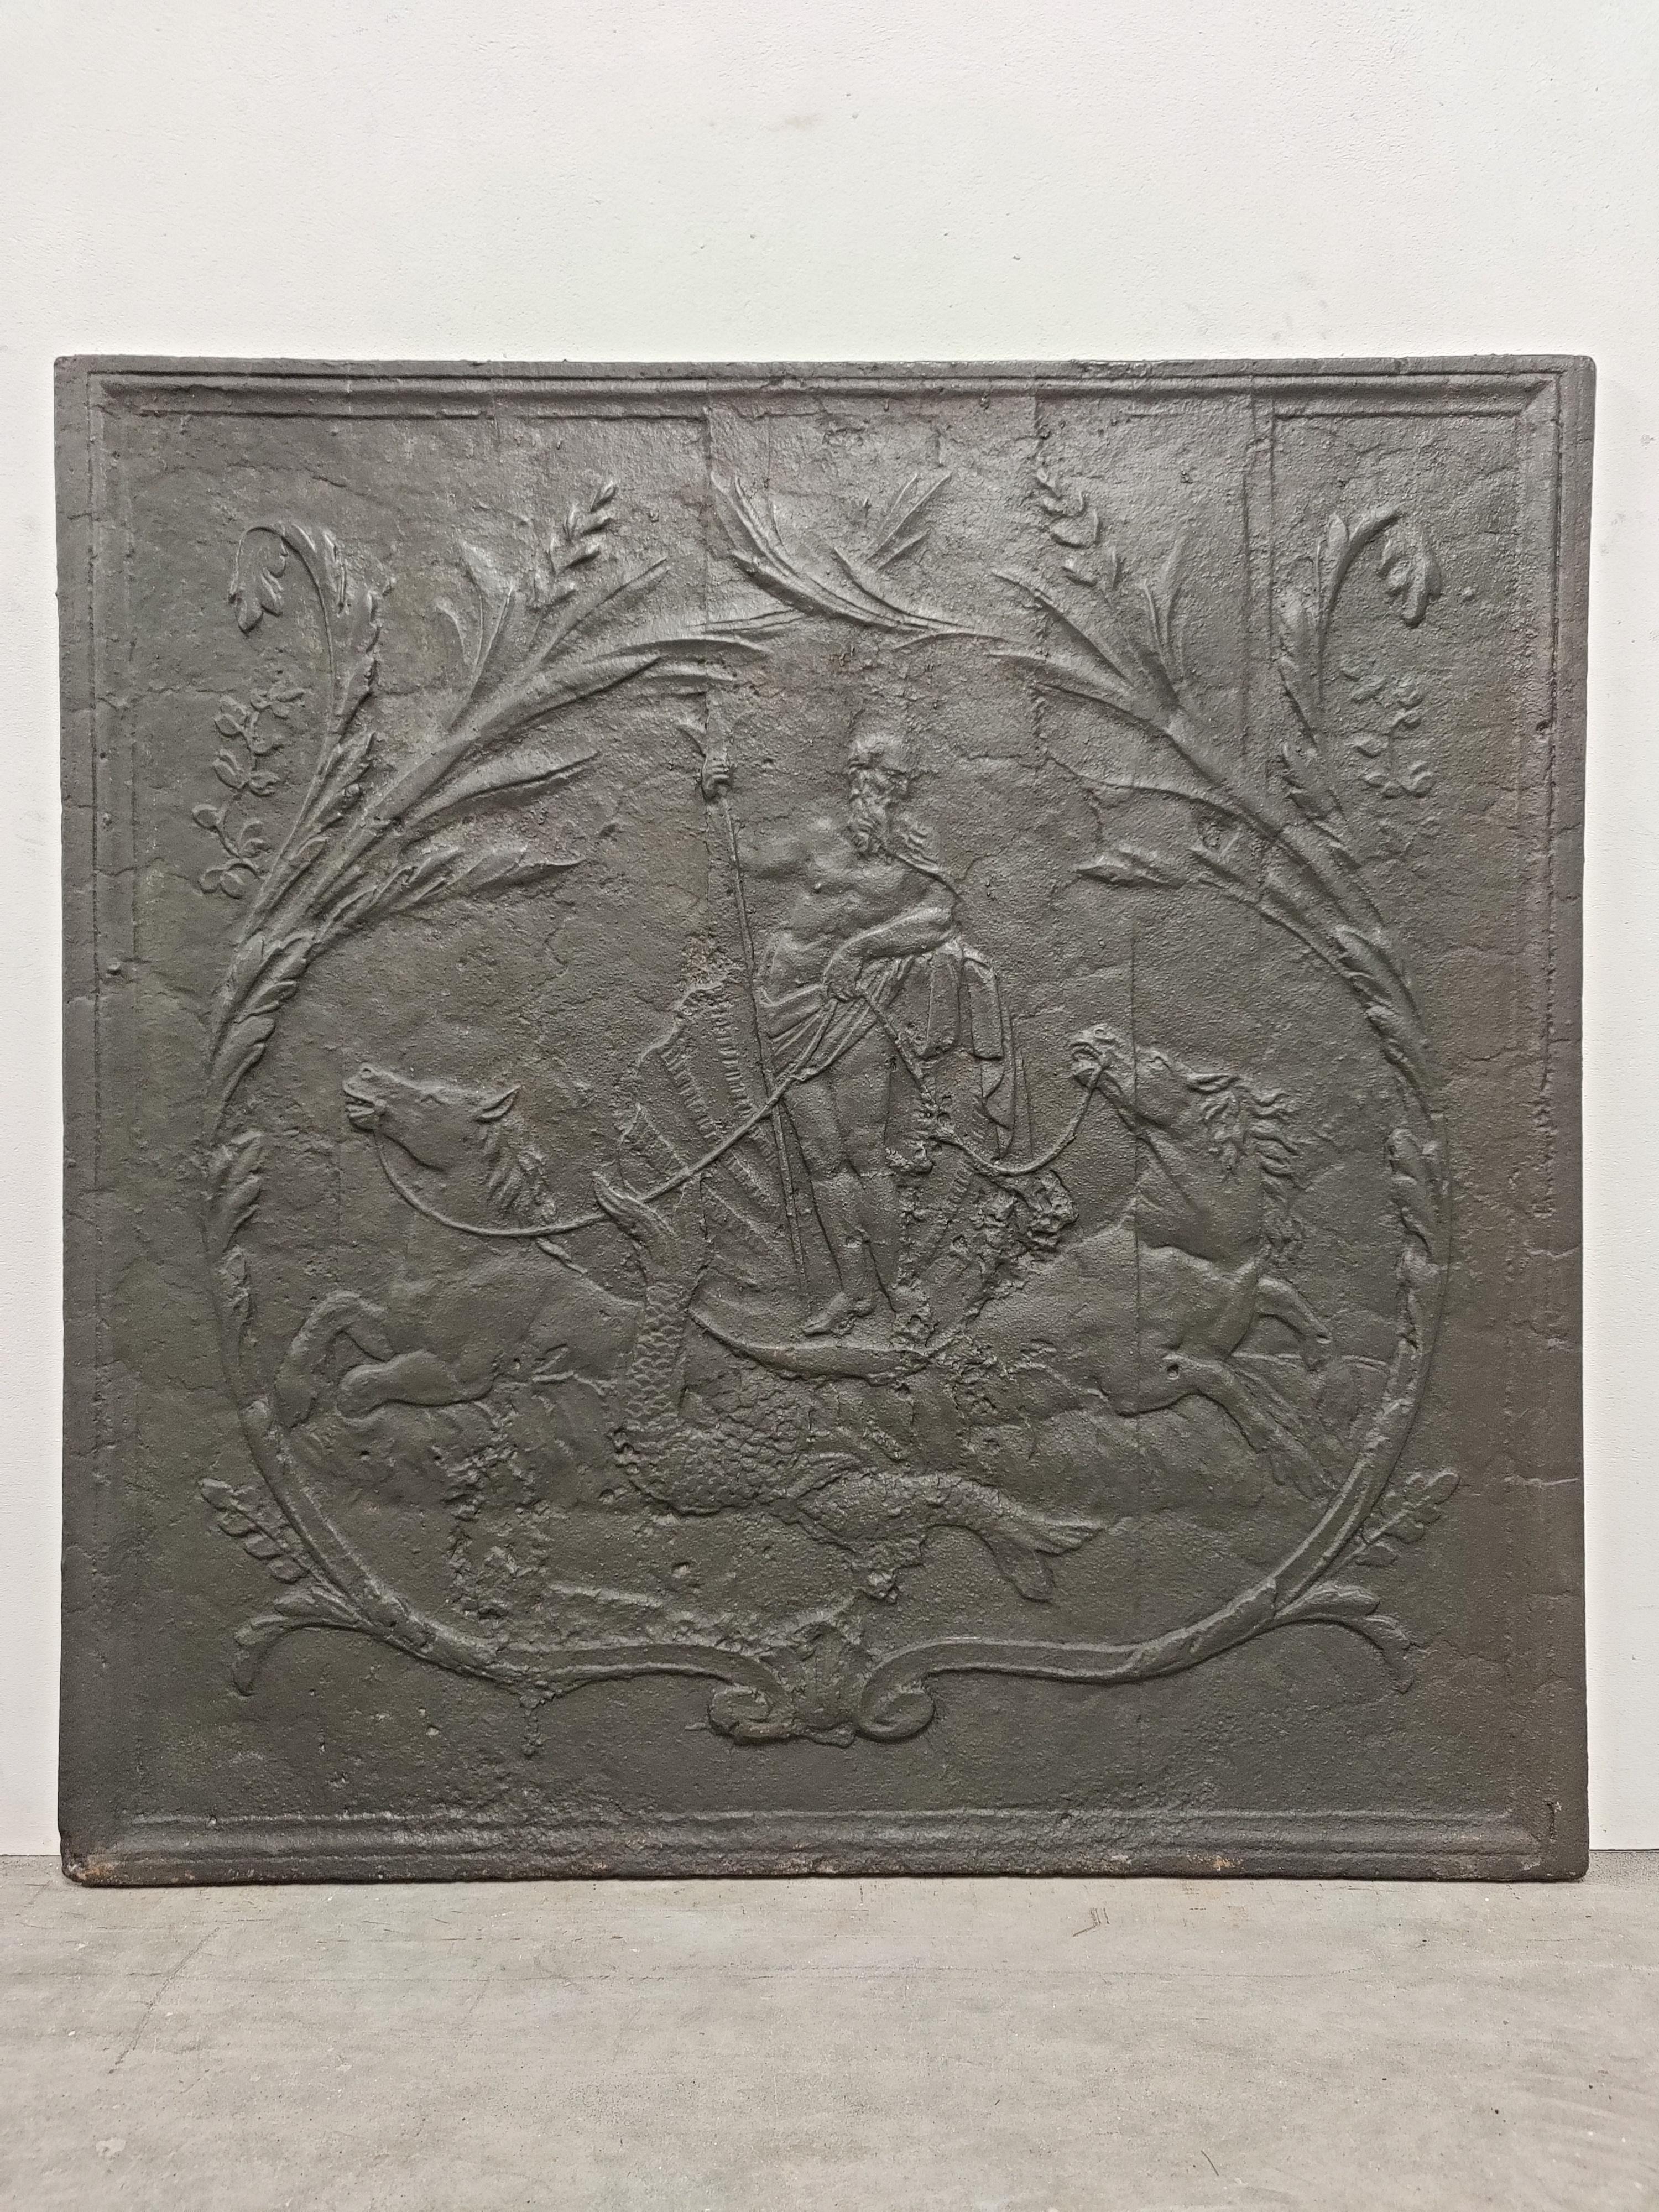 Beautifully detailed and square antique cast iron fireback.

This fireback shows Poseidon standing on a big shell in between of his sea horses while holding his trident.

Excellent condition, very usable dimension.
Can be placed in a fire or as